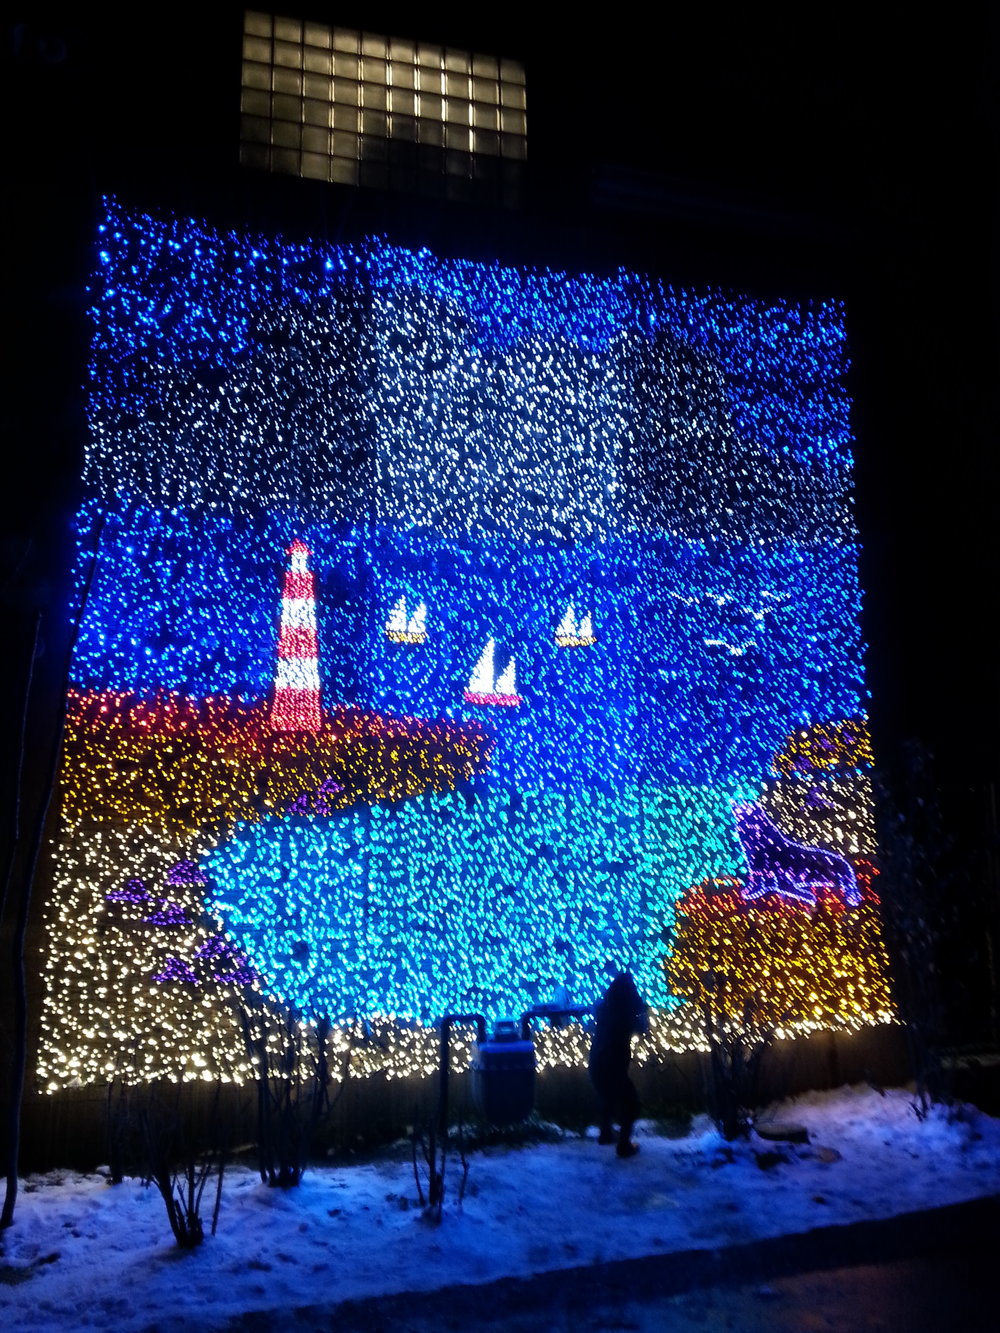 Oregon Zoo Zoolights - Portland - What to do in Southern Oregon